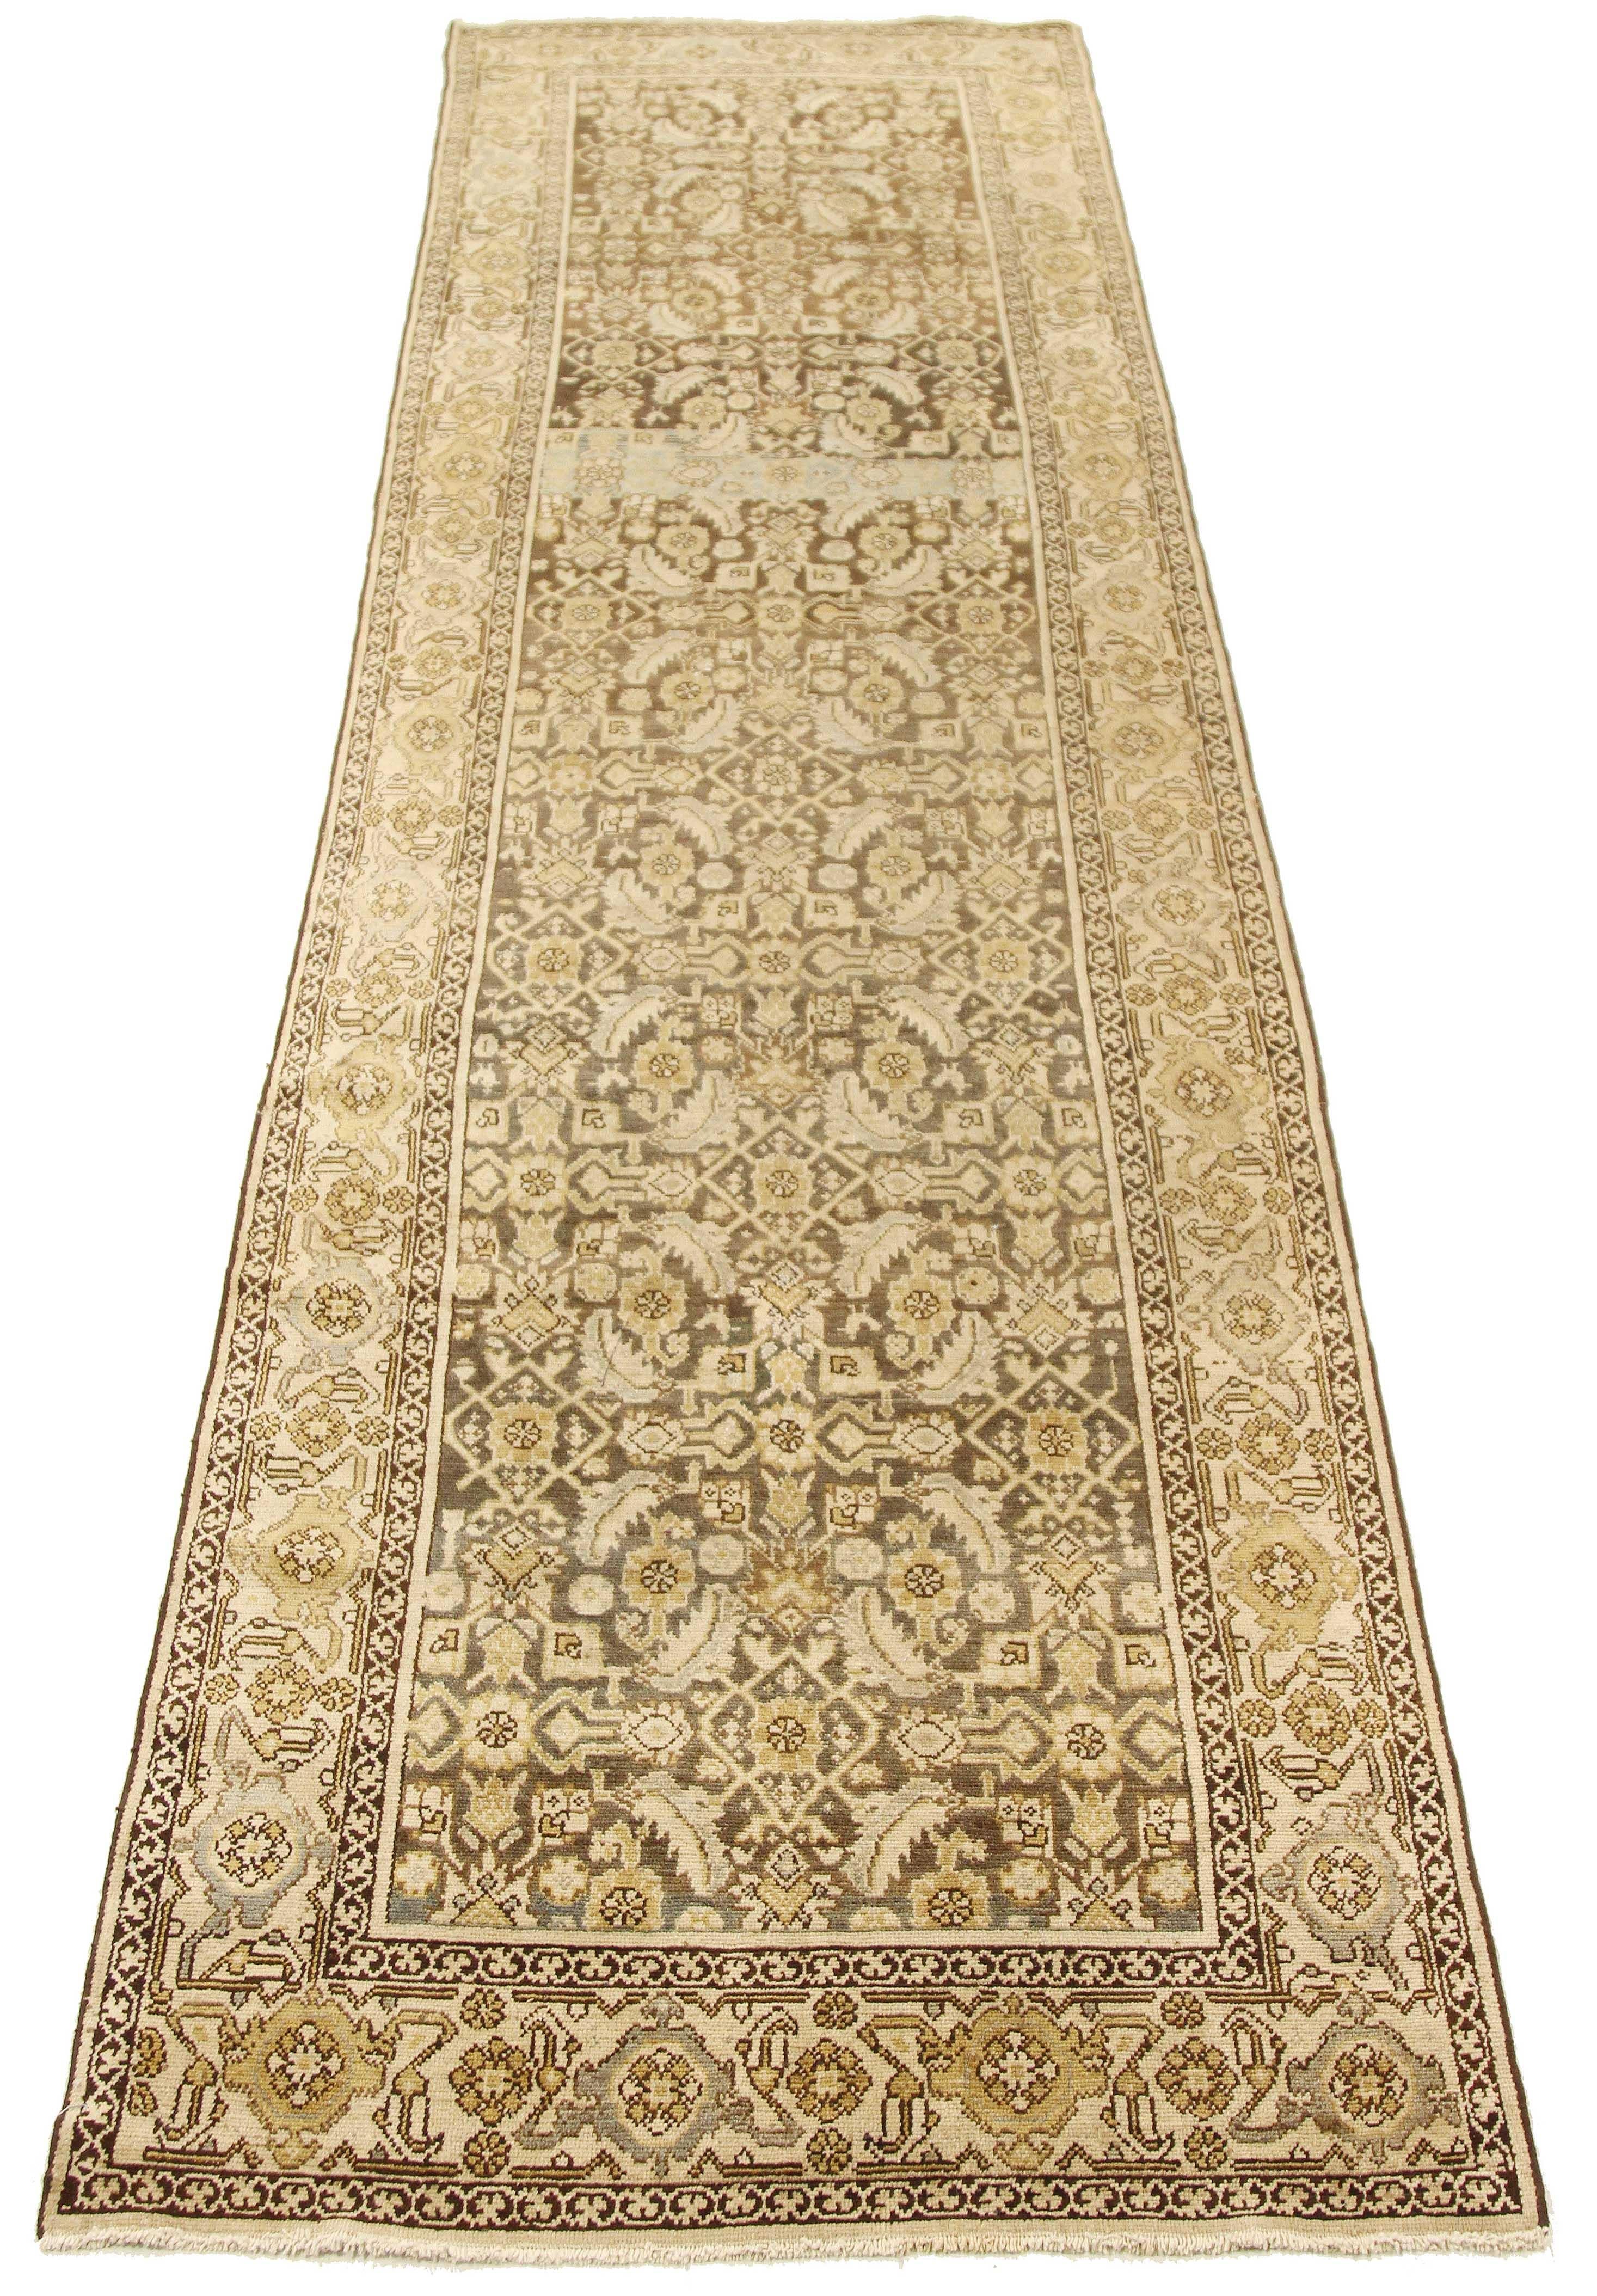 Antique Persian runner rug handwoven from the finest sheep’s wool and colored with all-natural vegetable dyes that are safe for humans and pets. It’s a traditional Malayer design featuring gray and beige botanical details on a brown and ivory field.